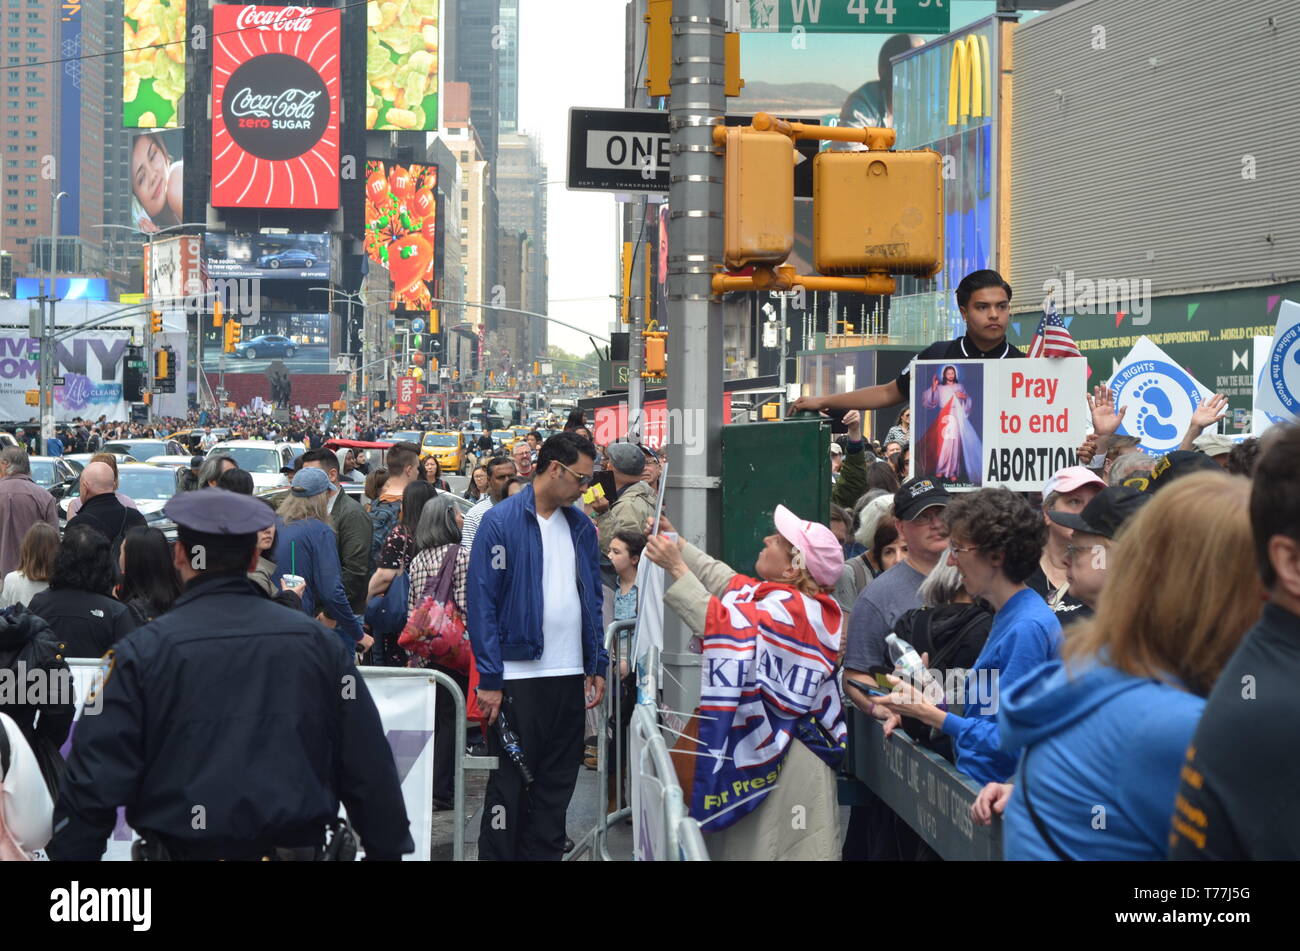 New York, USA. 4th May, 2019. A man seen holding a placard during the Abortion rally at the the Times Square in New York.People gathered in Times Square to protest against abortion law in New York State, the law legalizes late term abortion until the moment of birth. During the demonstration a doctor performed a live 4D ultrasound showing an unborn baby in the womb & callousness of late term abortion. Credit: Ryan Rahman/SOPA Images/ZUMA Wire/Alamy Live News Stock Photo